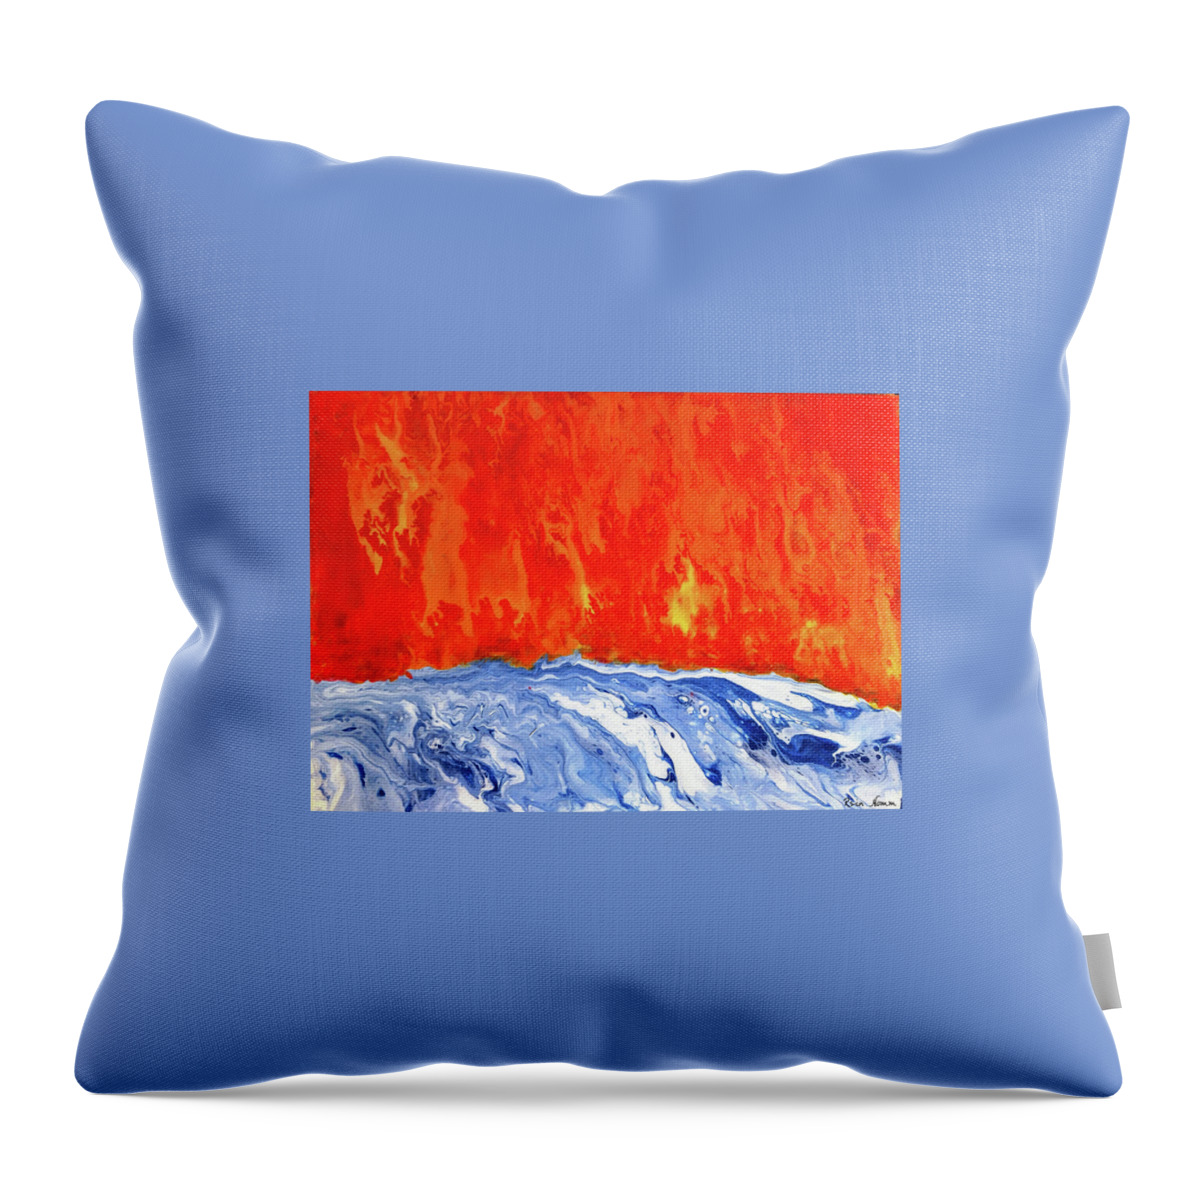  Throw Pillow featuring the painting Fire and Flood by Rein Nomm